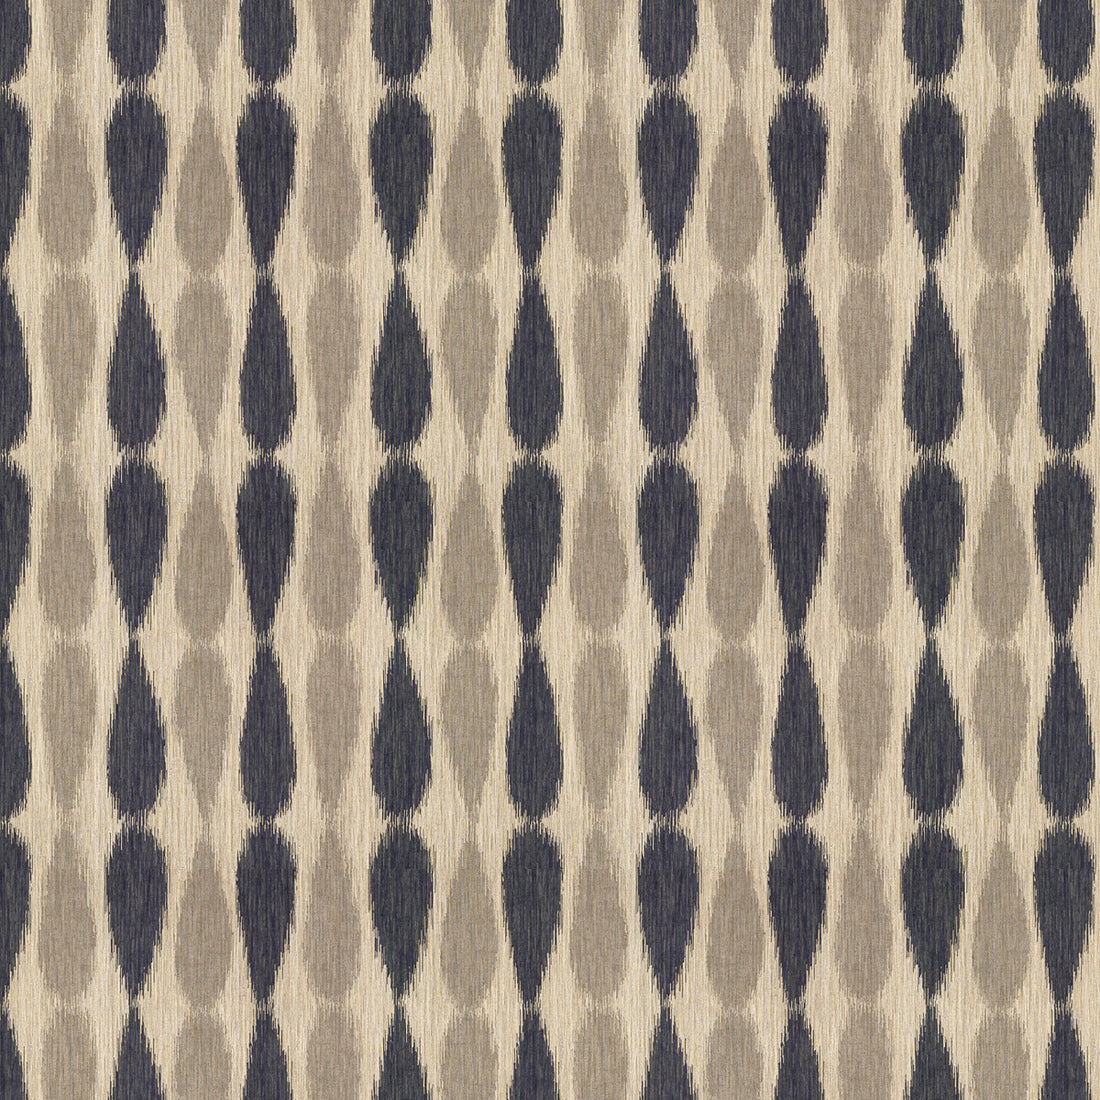 Ikat Drops fabric in midnight color - pattern GWF-2927.511.0 - by Lee Jofa Modern in the Allegra Hicks II collection